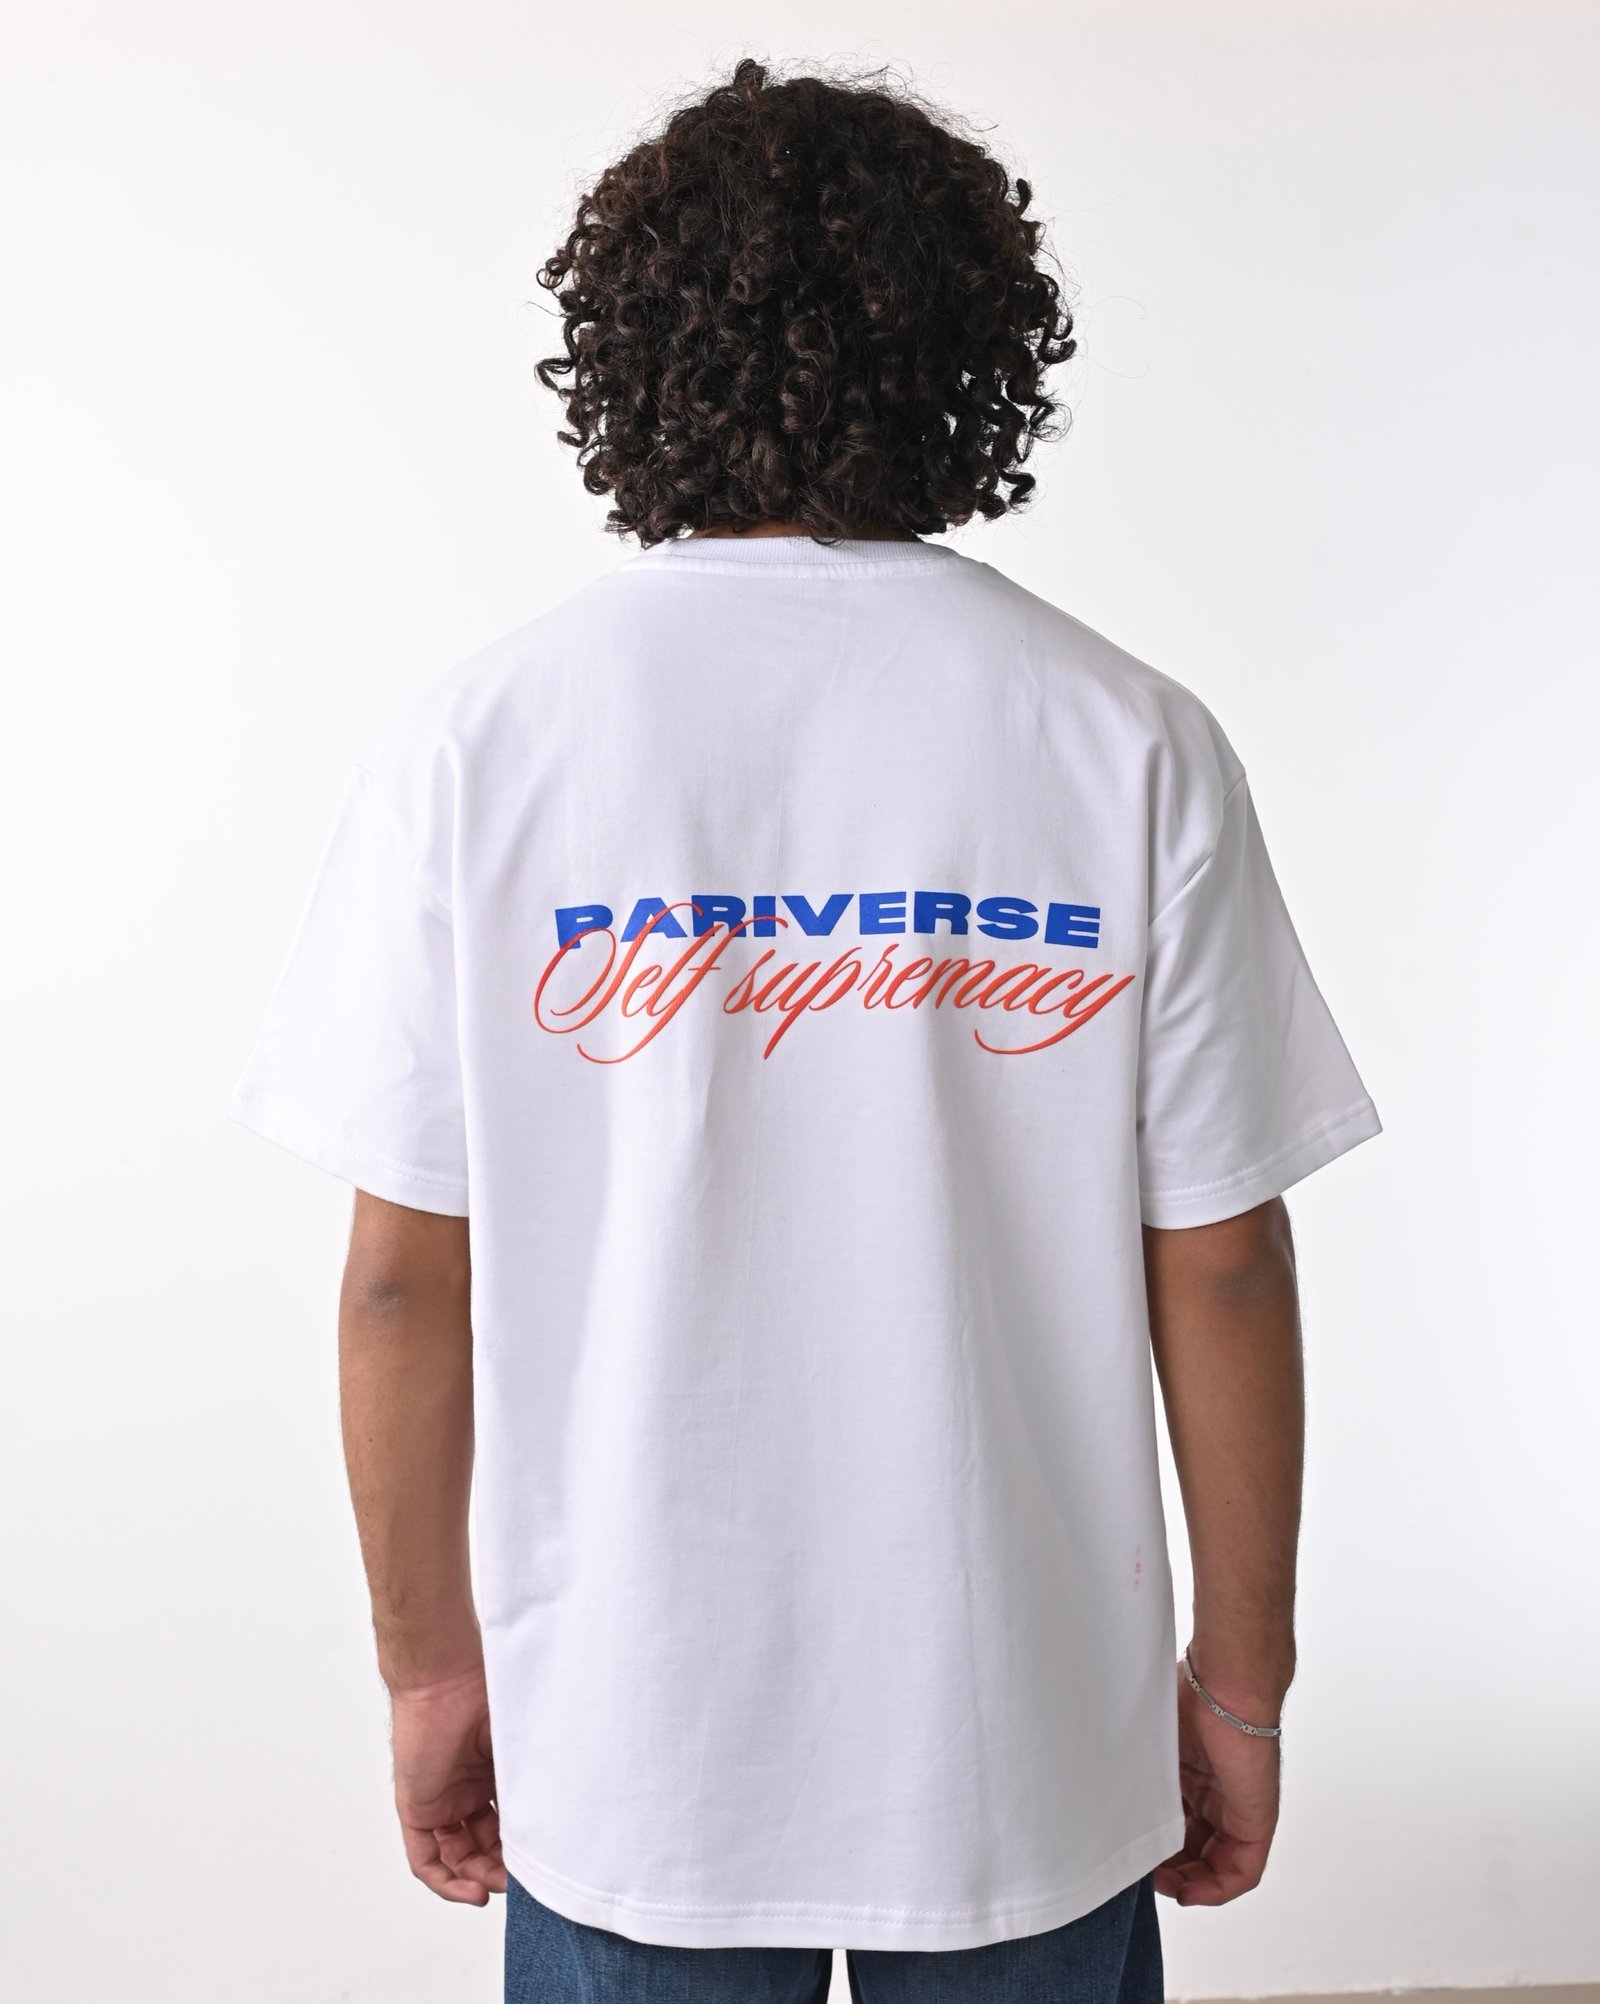 The Pariverse - Rated #1 Streetwear Brand in India